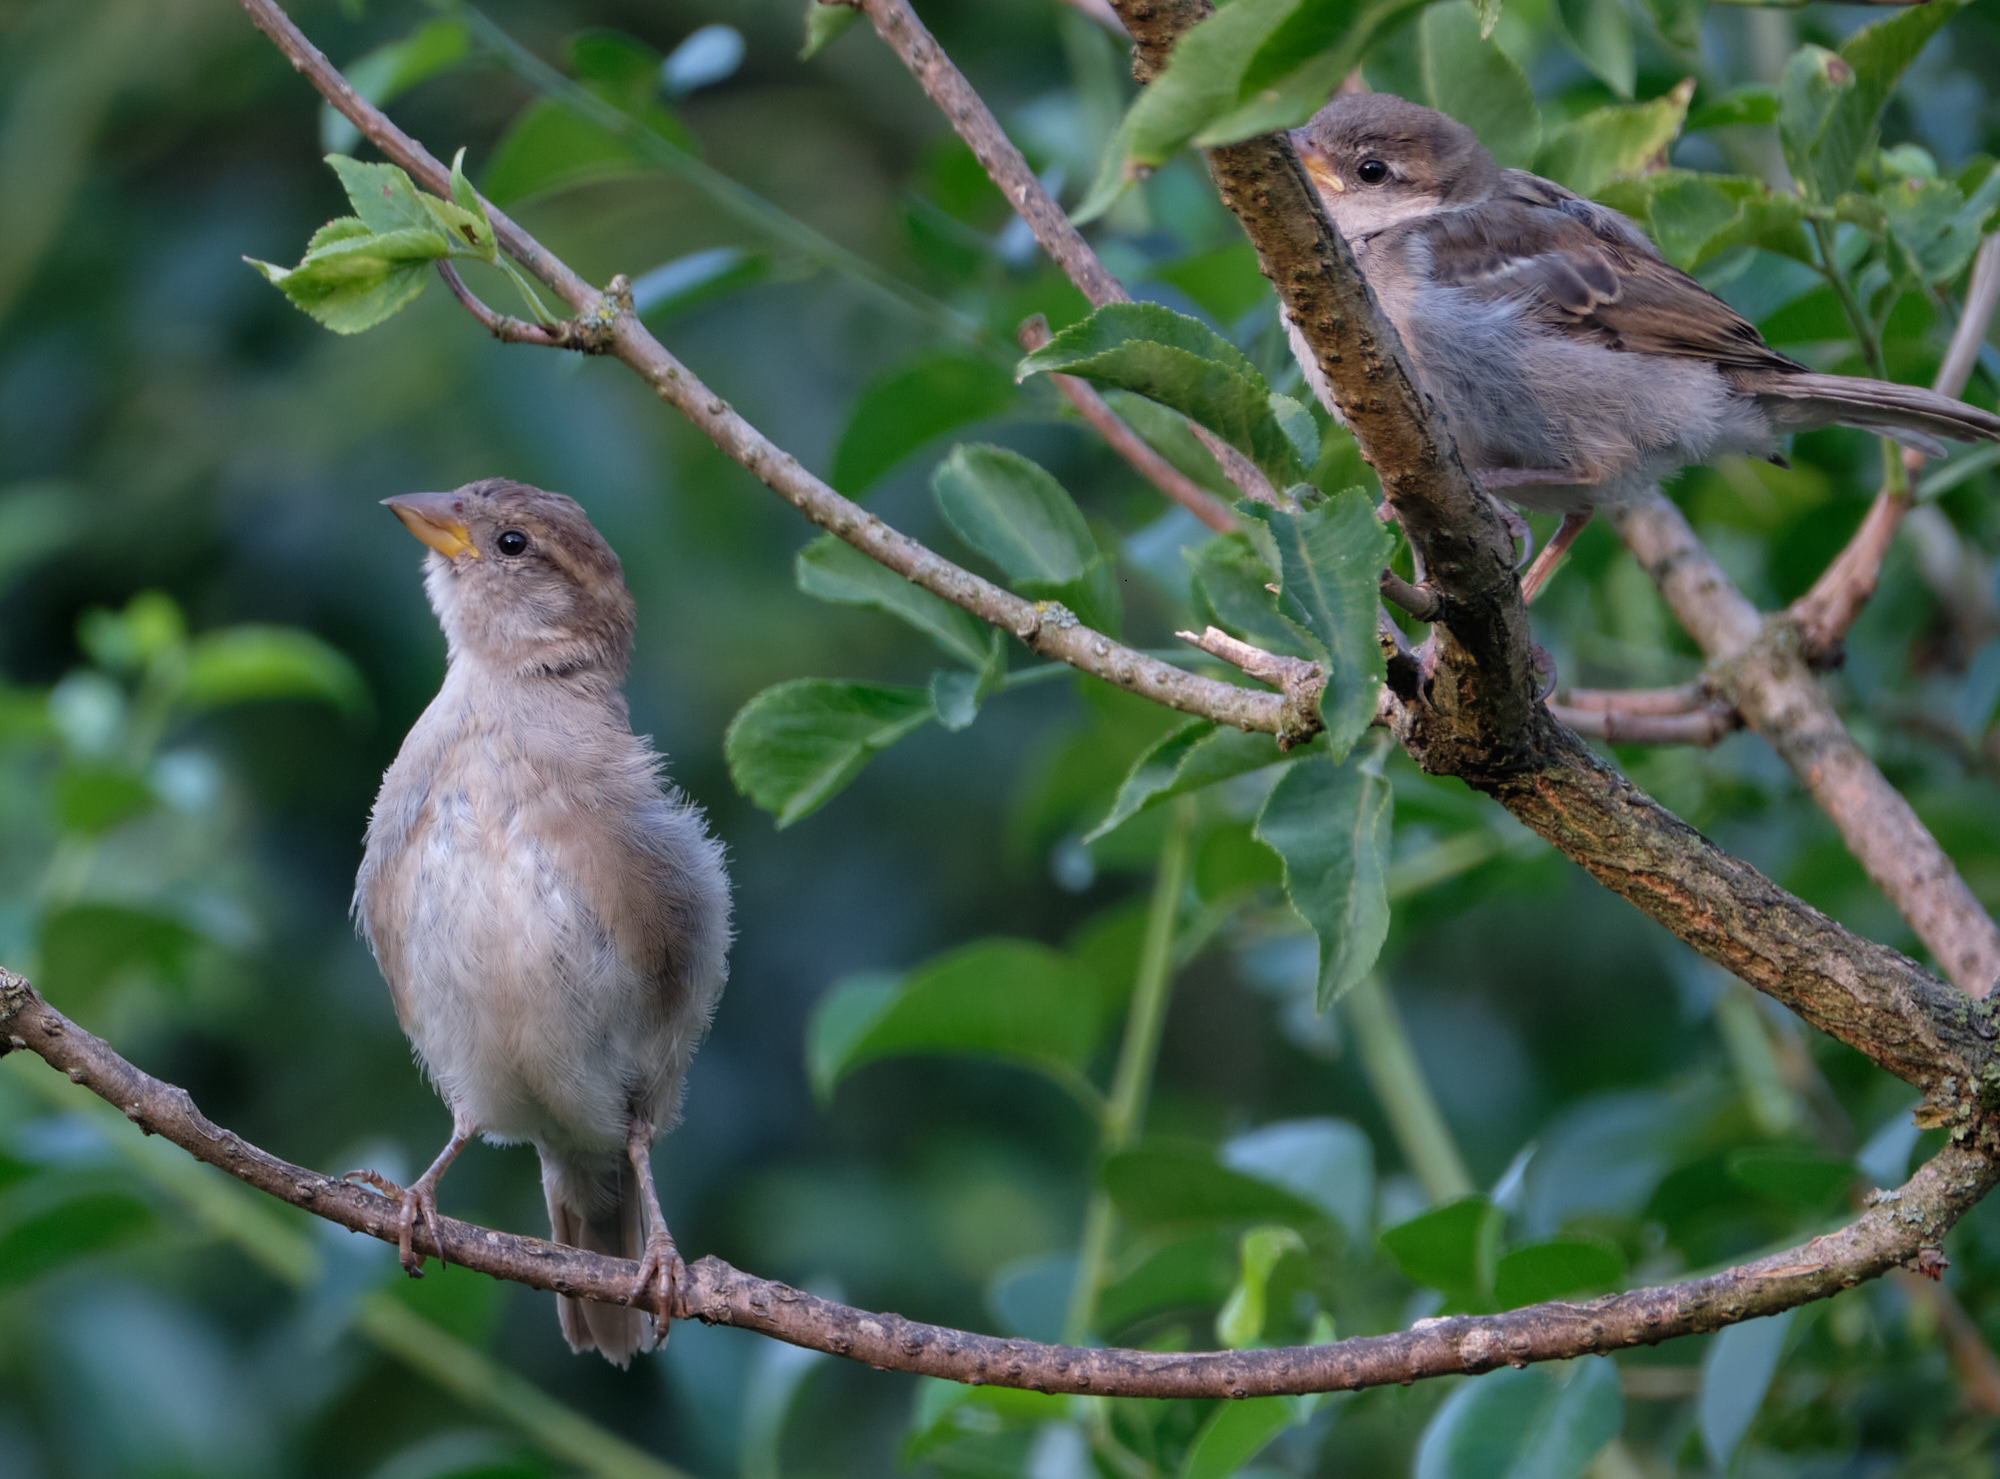 junge Haussperlinge / young house sparrows